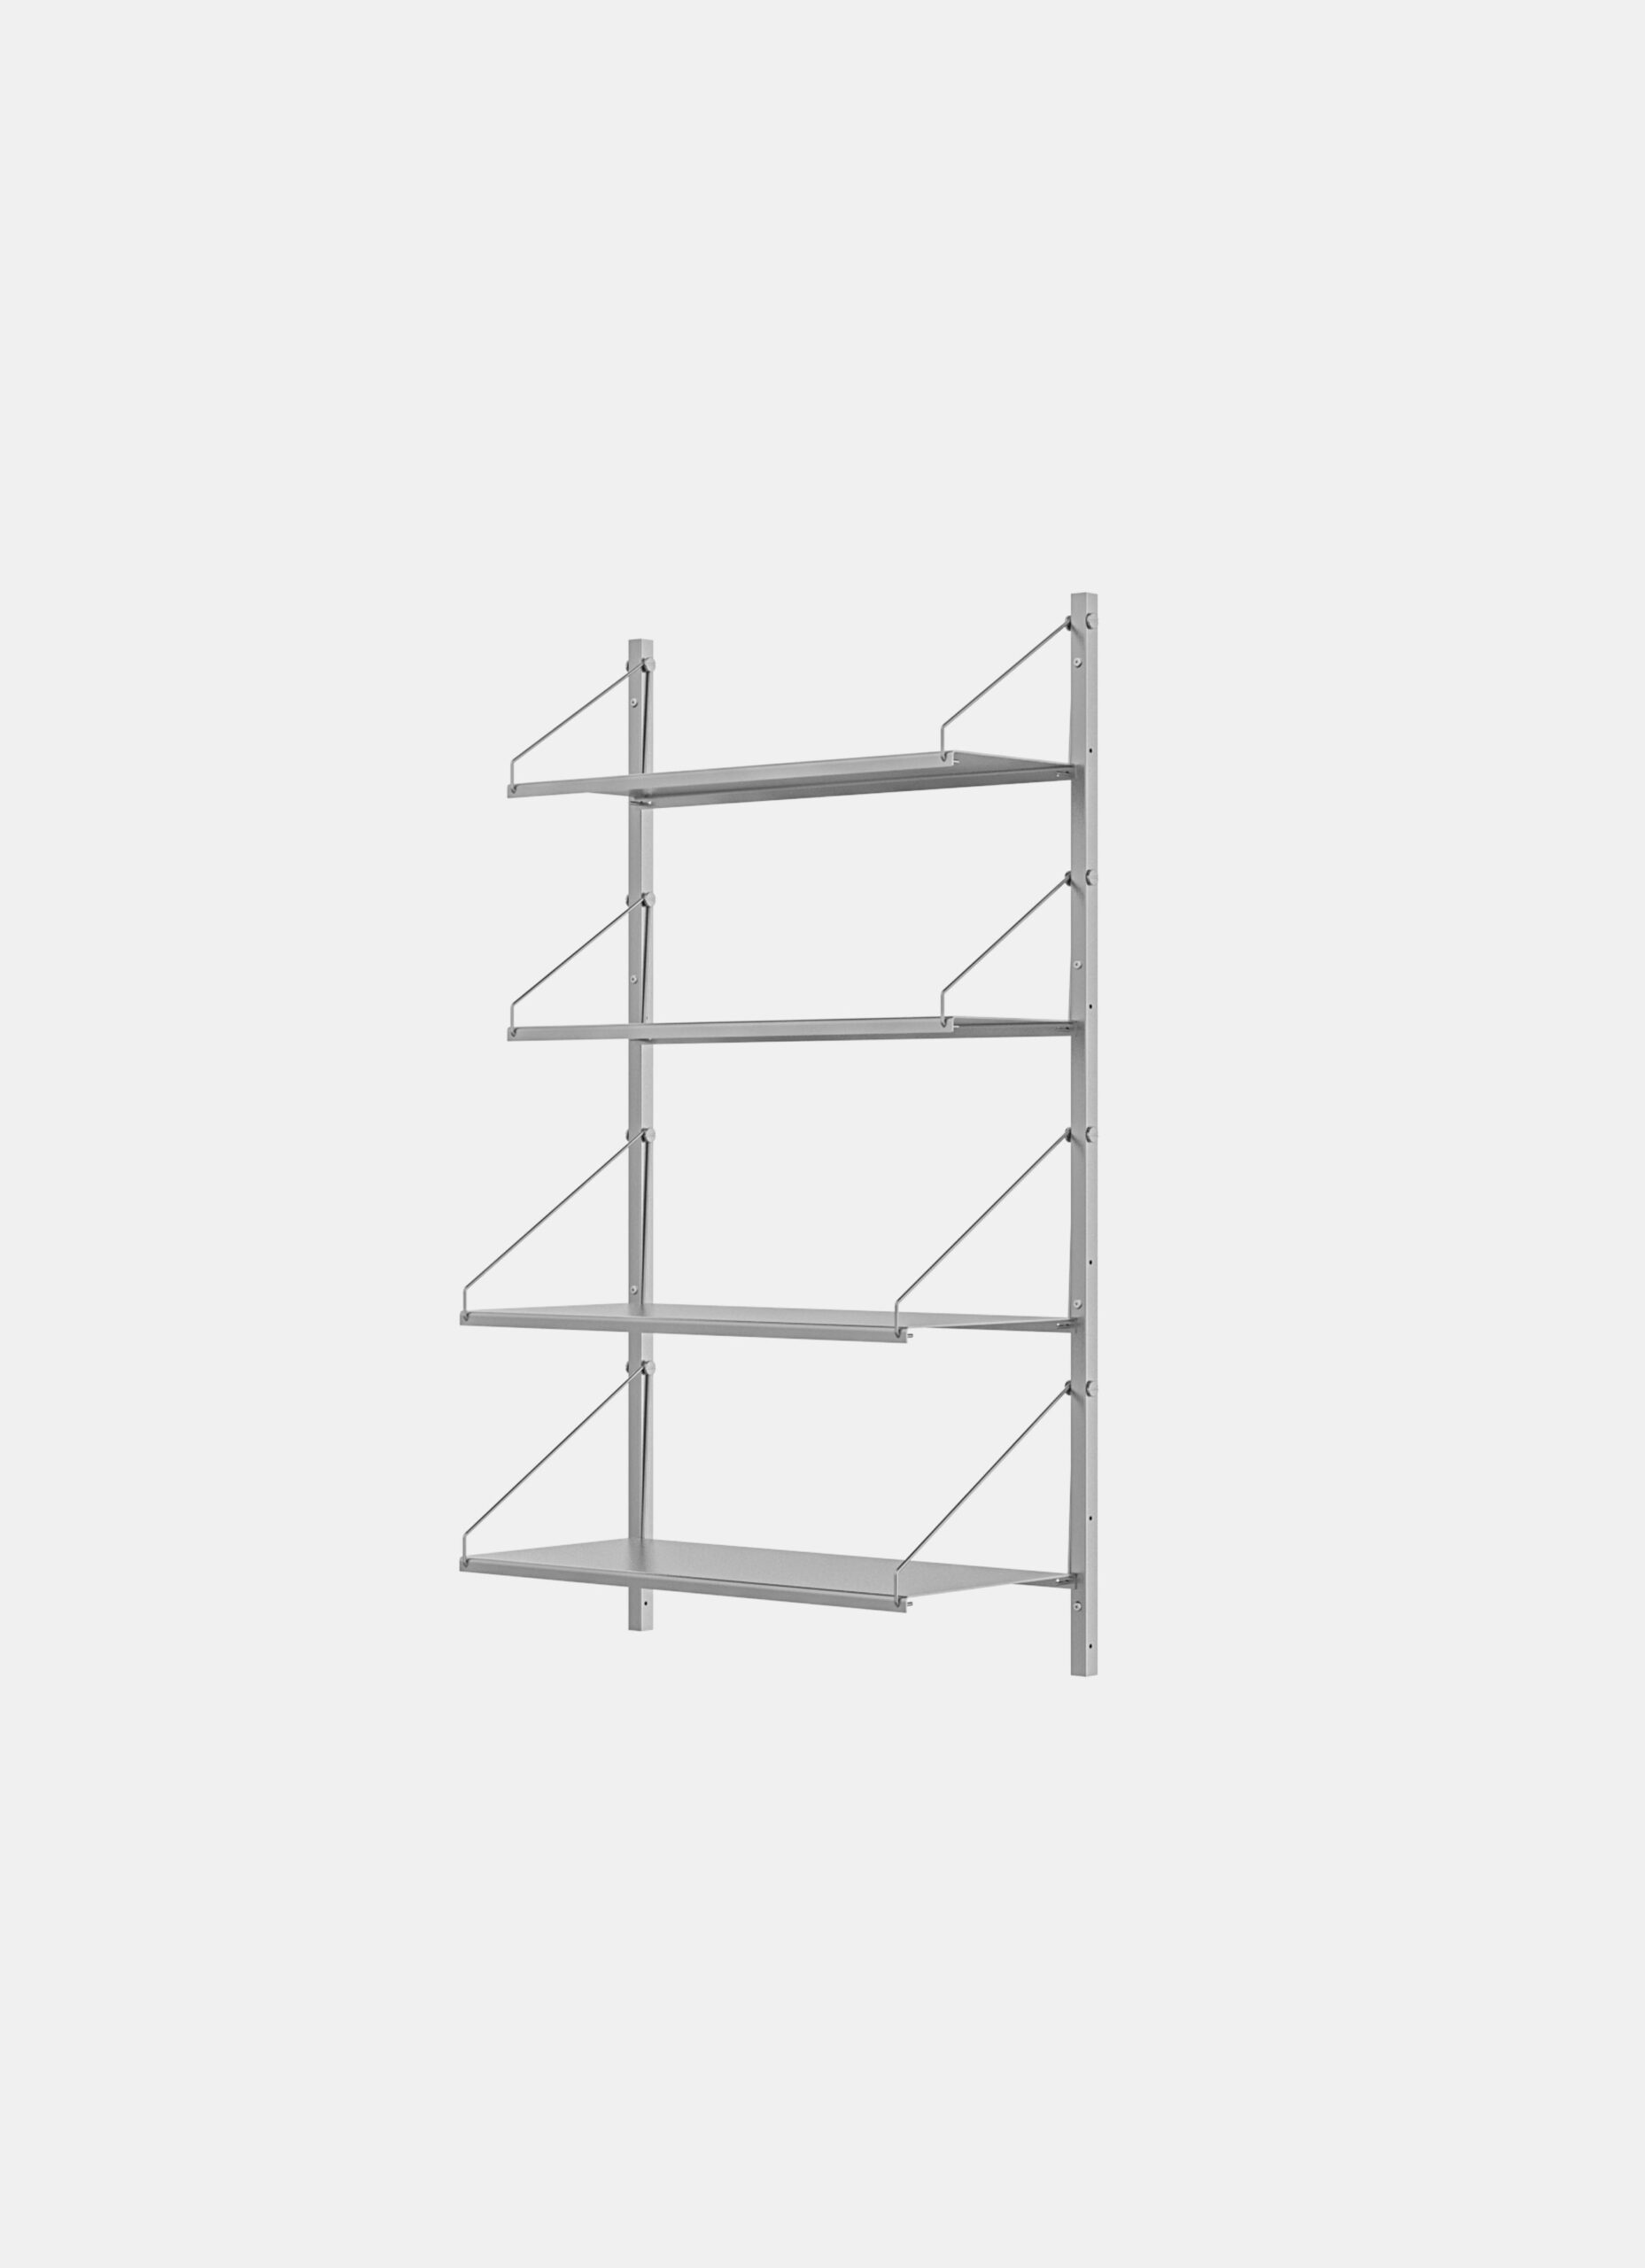 Frama - Shelf Library - Stainless Steel - H1084 - W80 Section